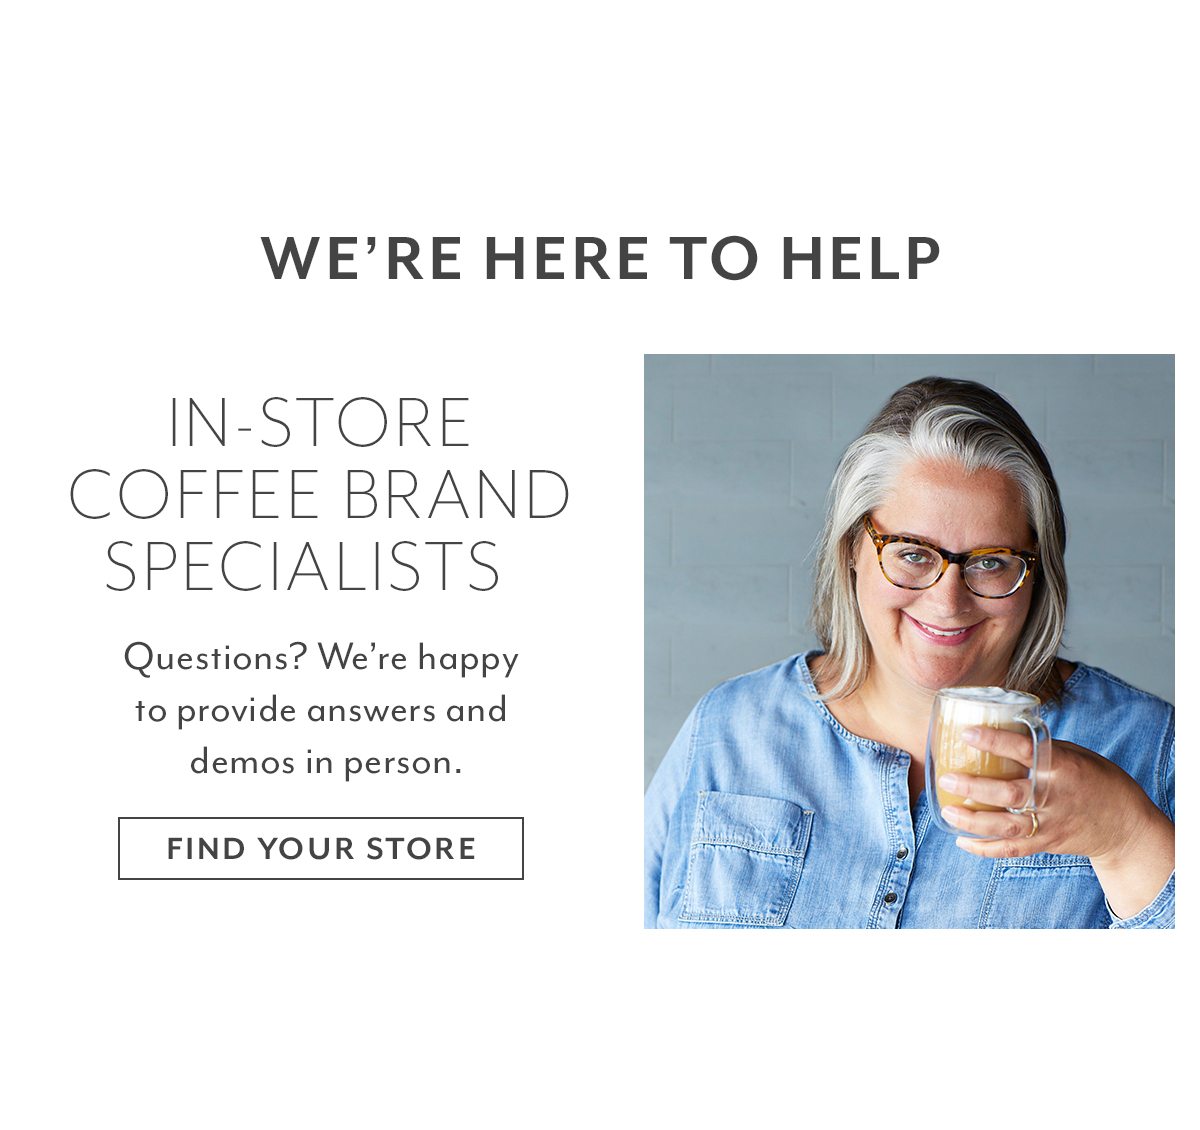 In-Store Coffee Brand Specialists